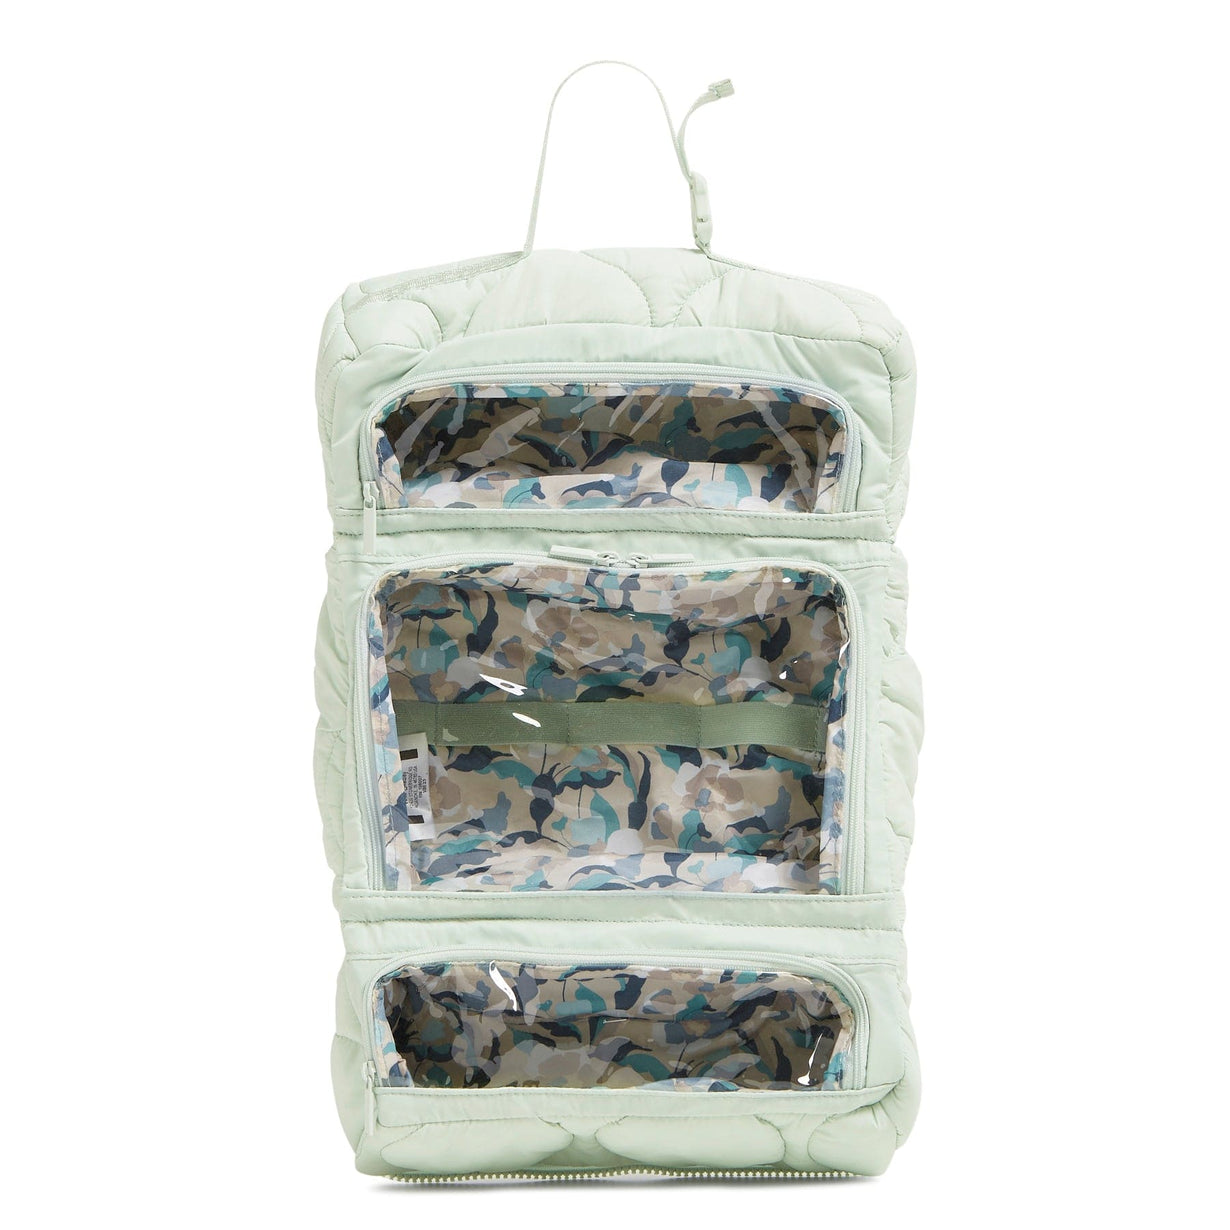 lightweight green organizer bag shown hanging with three compartments for toiletries